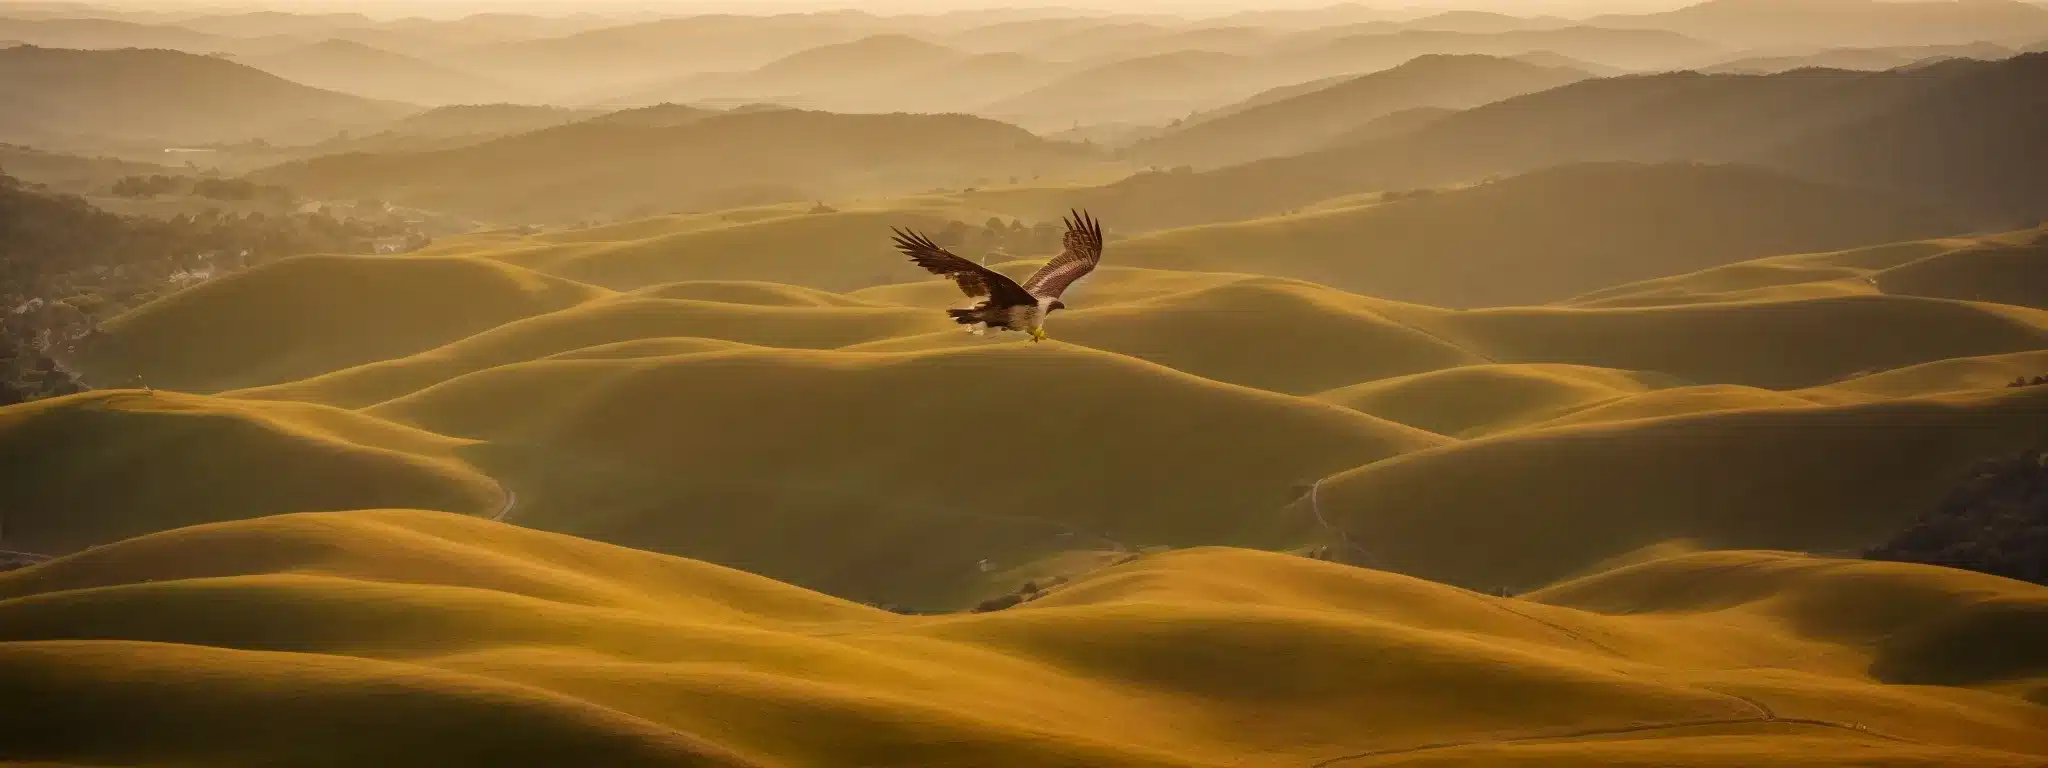 A Hawk Soaring High Above An Undulating Landscape Of Hills And Valleys Bathed In The Golden Light Of Dawn.